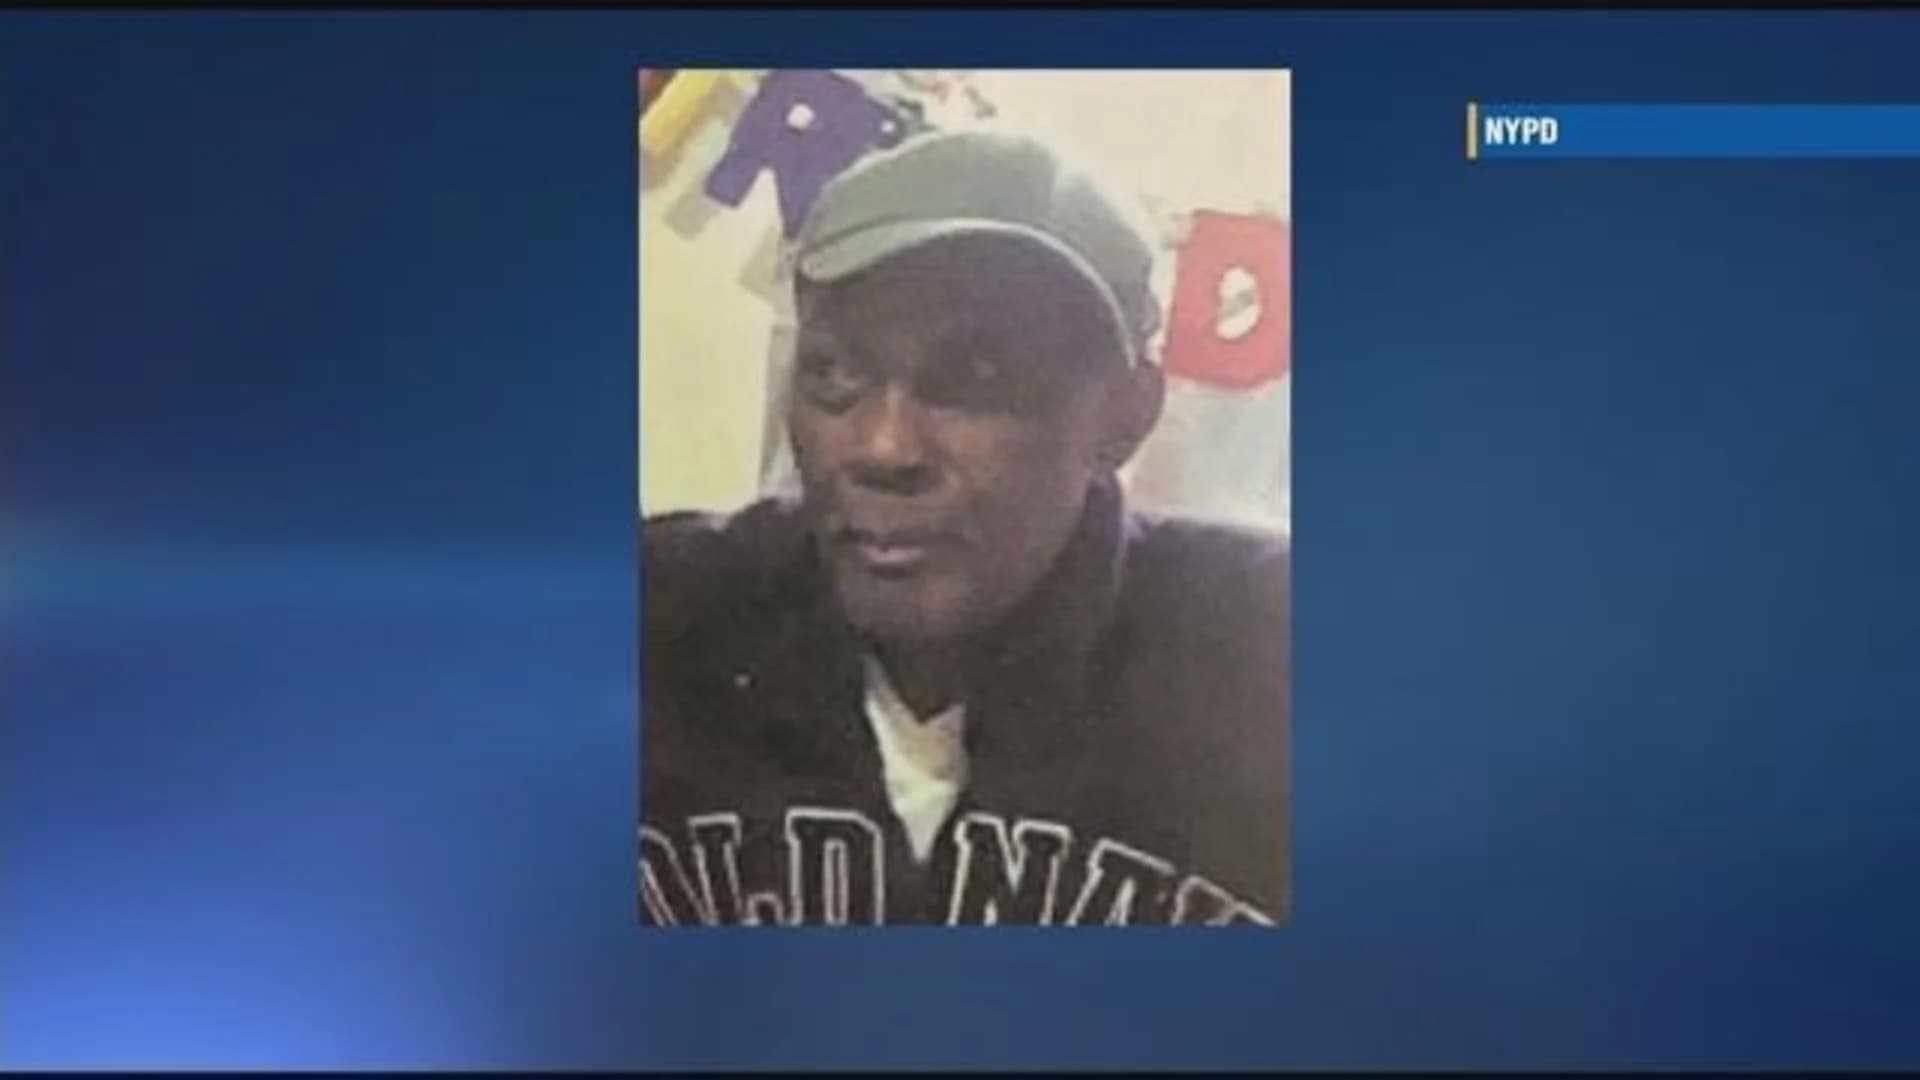 Police: 78-year-old man missing, last seen on Feb. 8